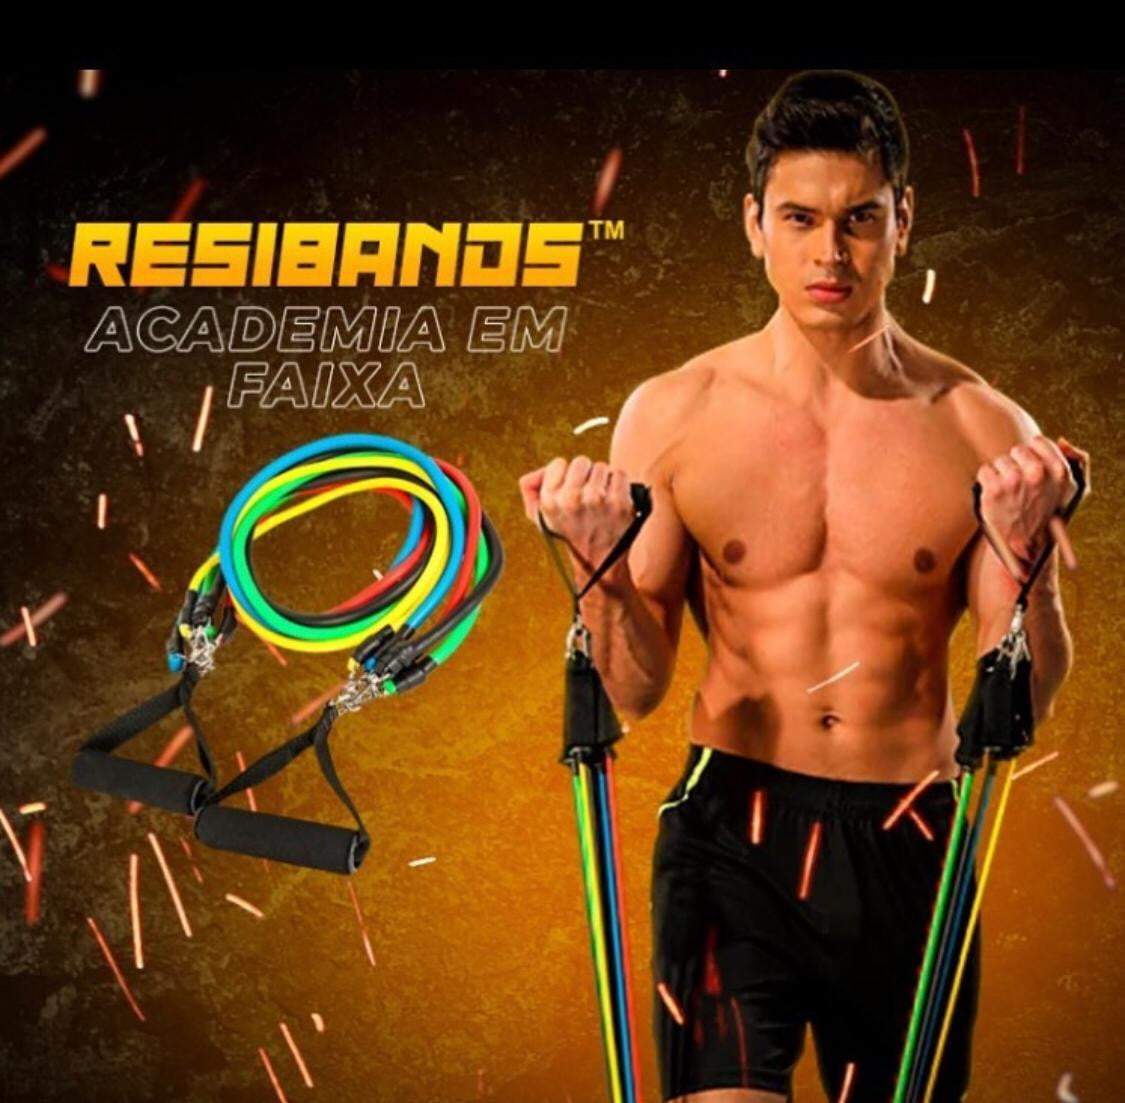 WorkoutBands™ Fitness Resistance Band Set - Best At Home Gym - Westfield Retailers